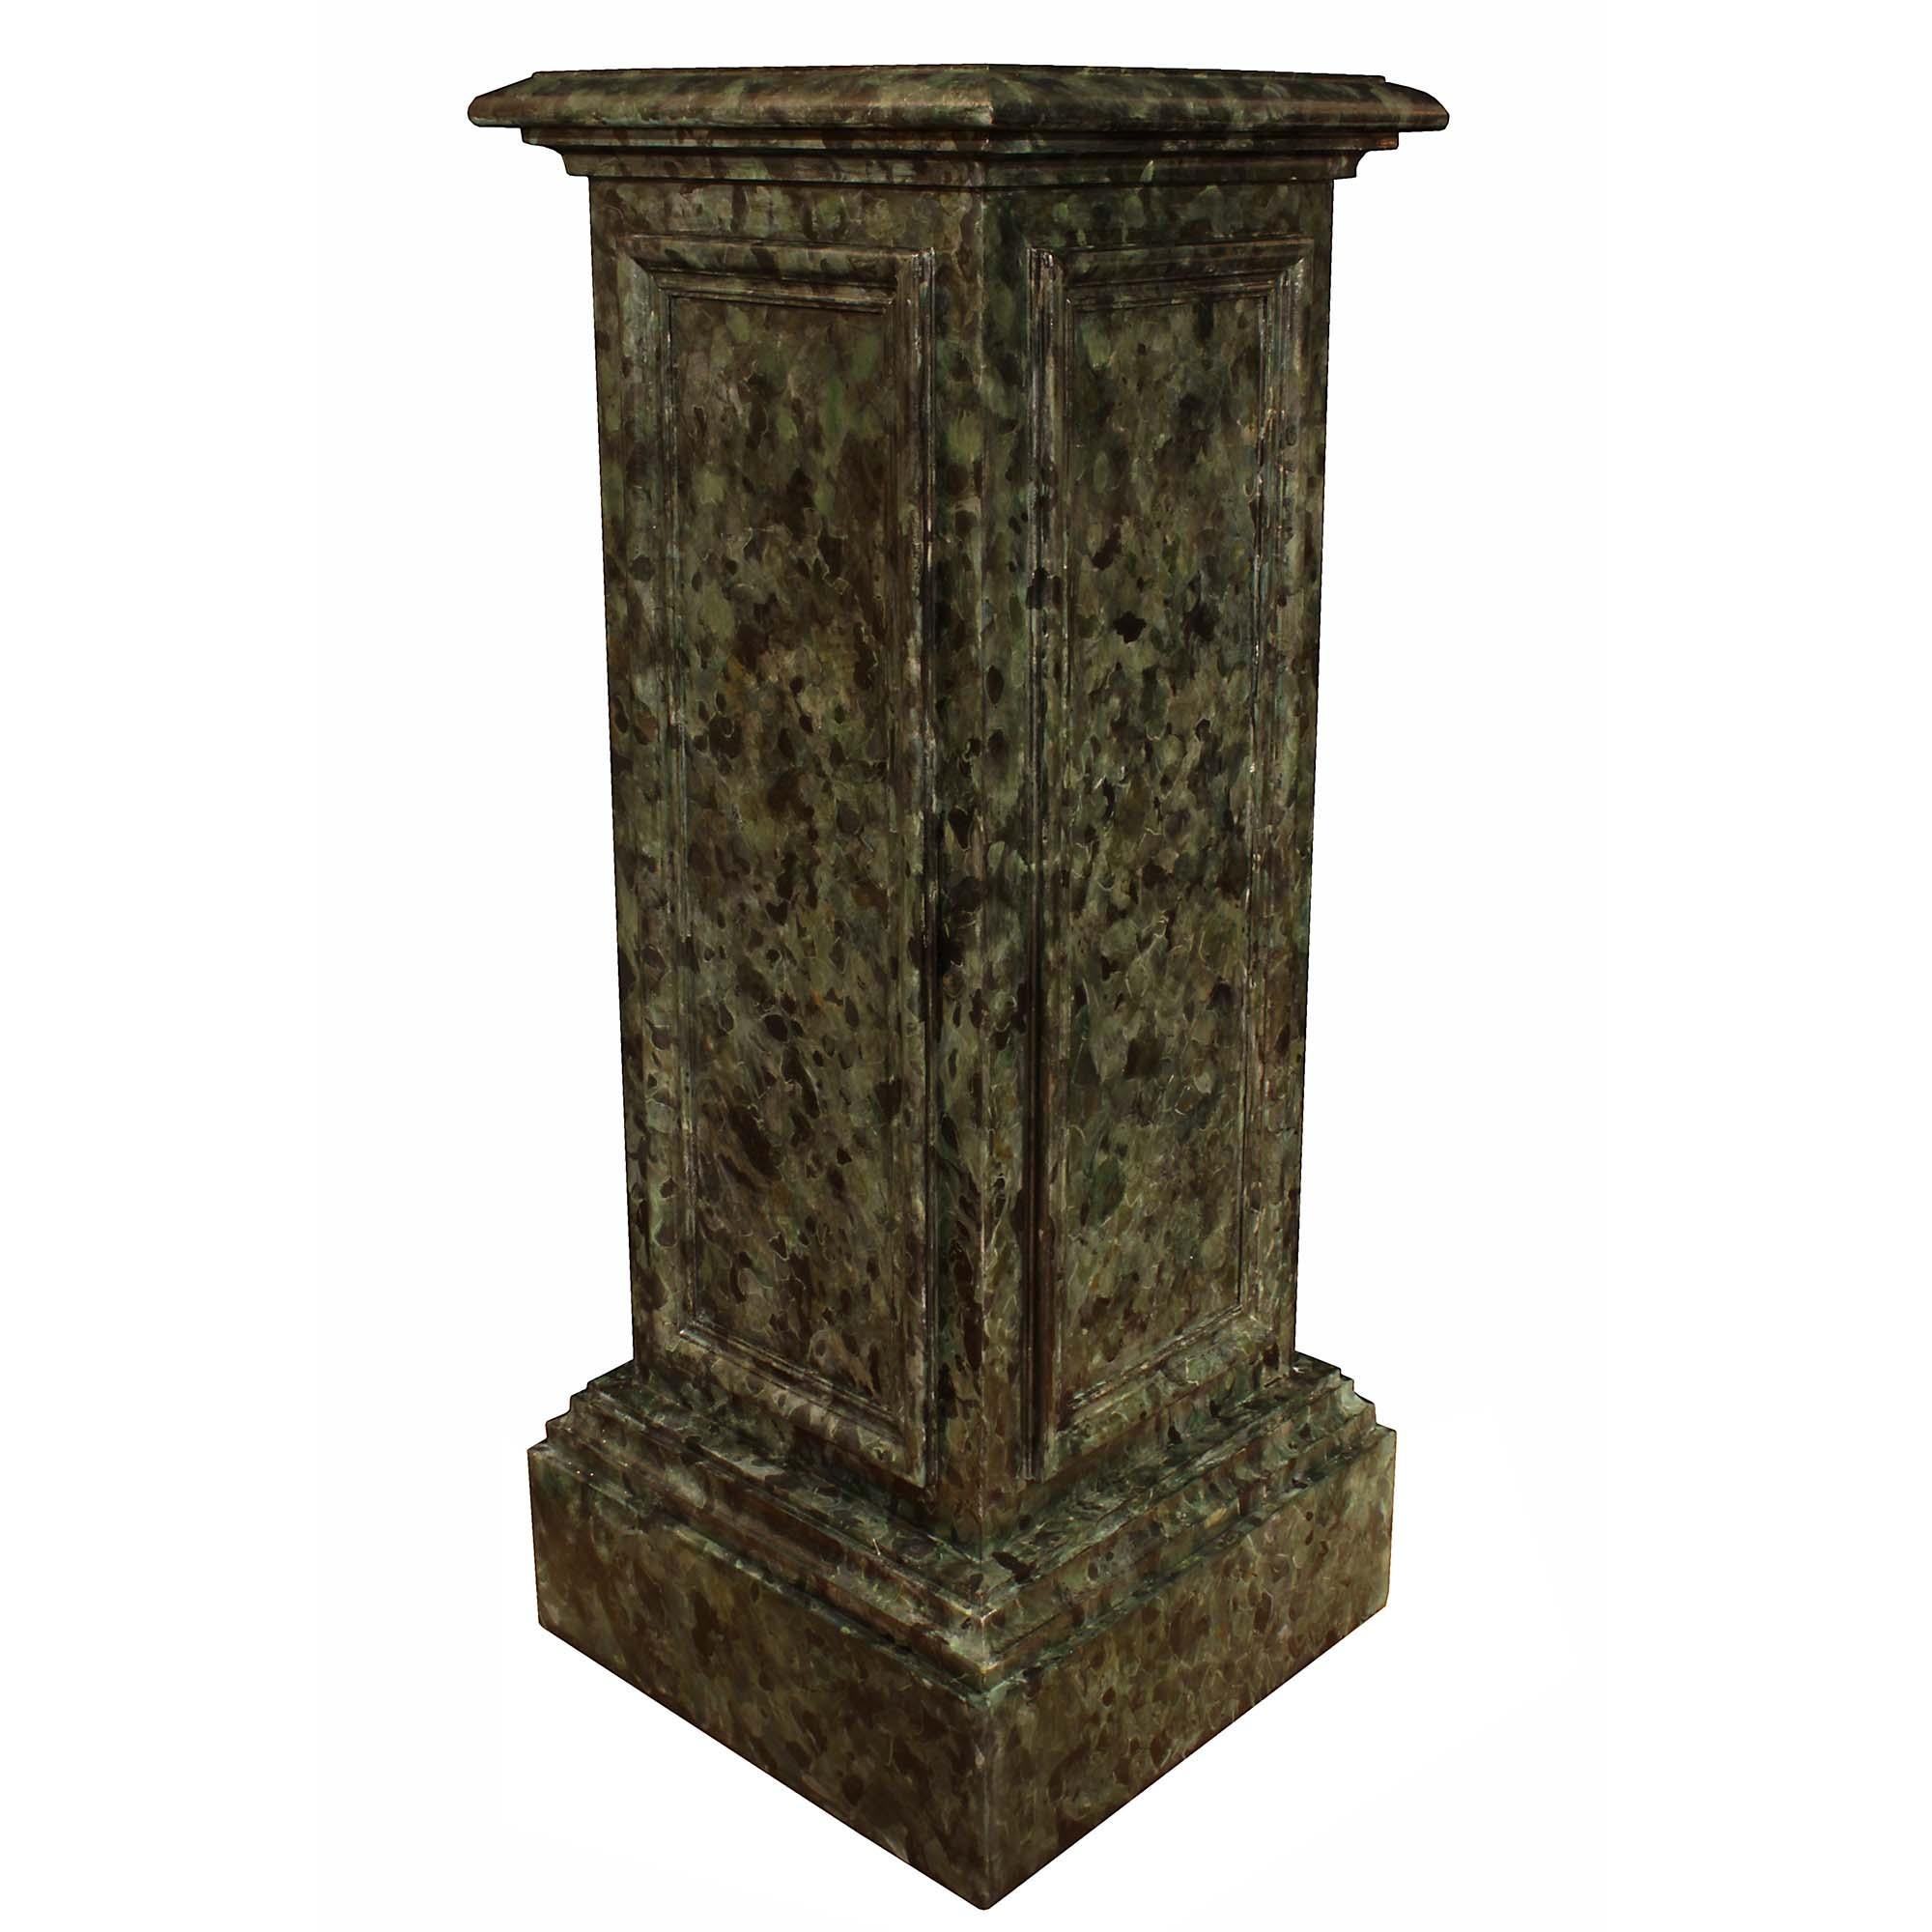 A stunning pair of Italian 19th century classical columns. Each faux marble painted column is raised on a square mottled base. The central body has handsome recessed panels at each side. All below the square mottled solid platform. Extremely